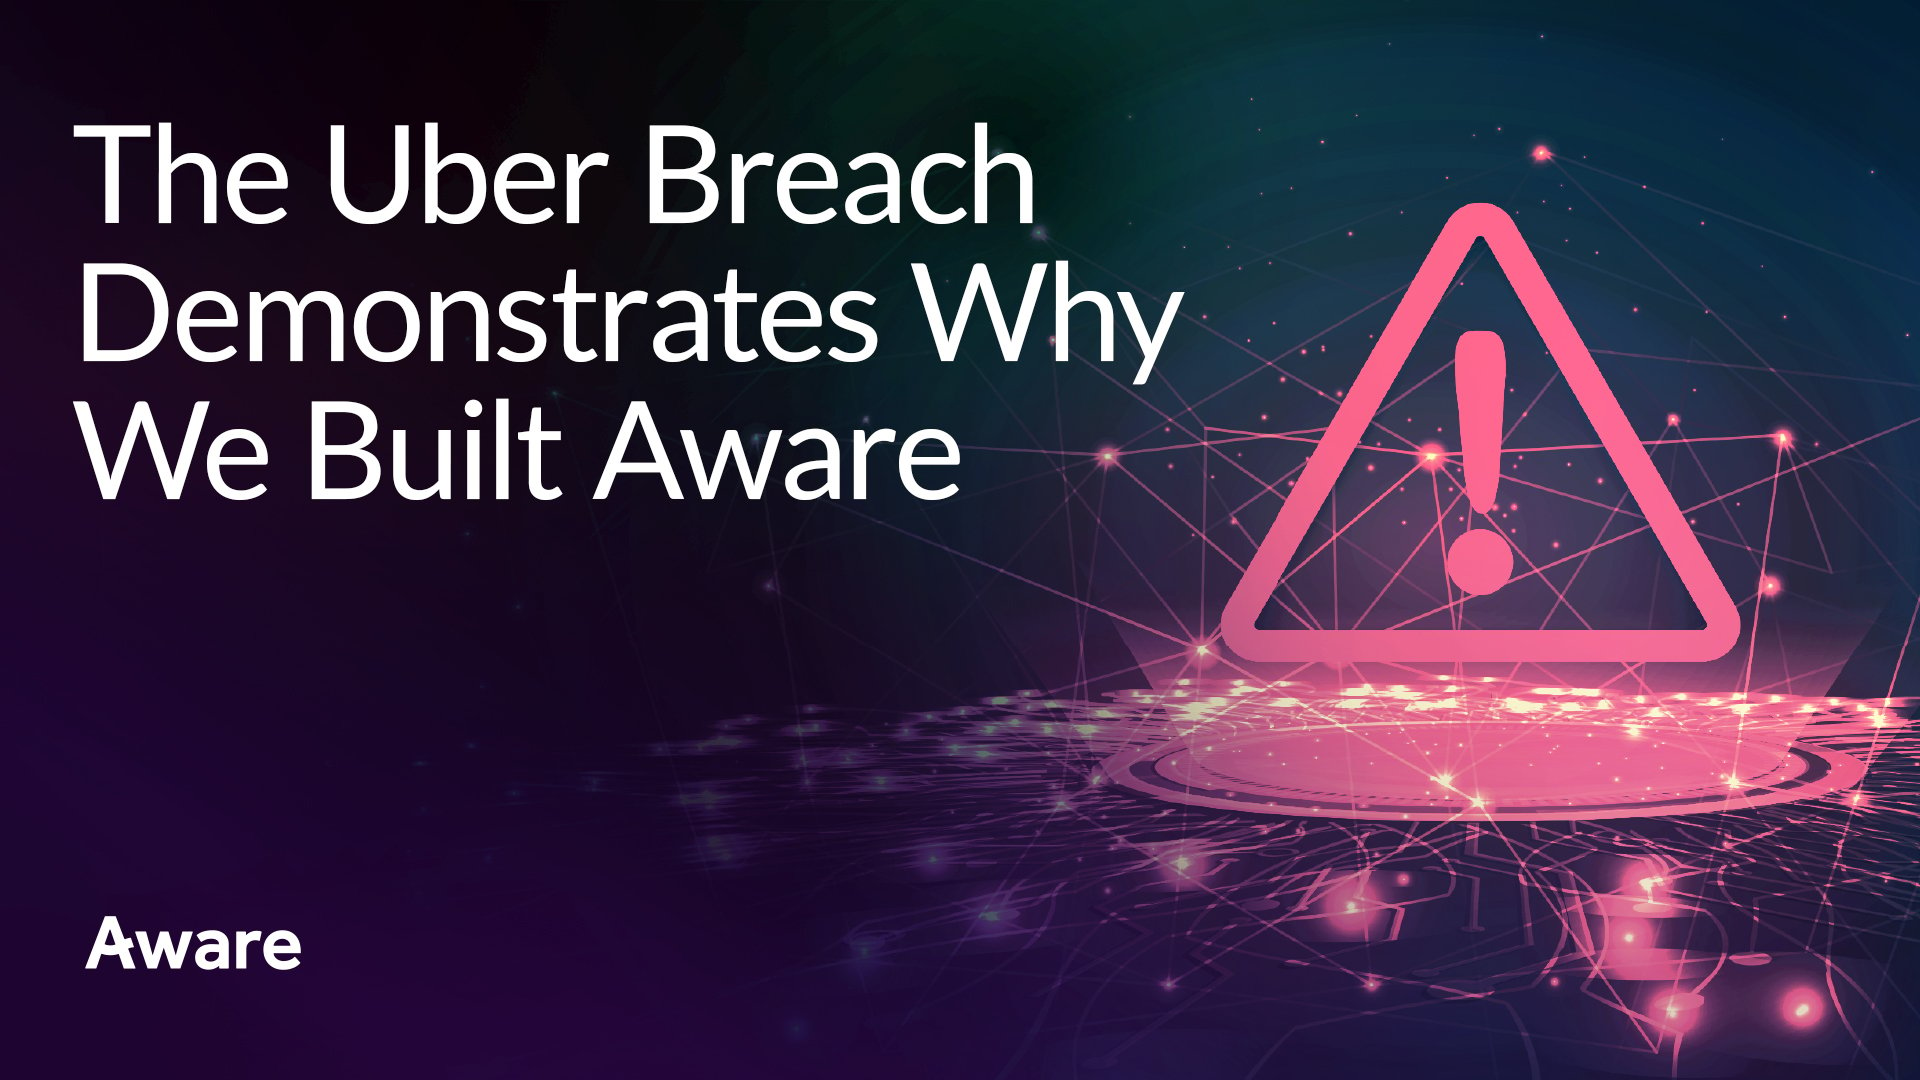 The Uber Breach Demonstrates Why We Built Aware